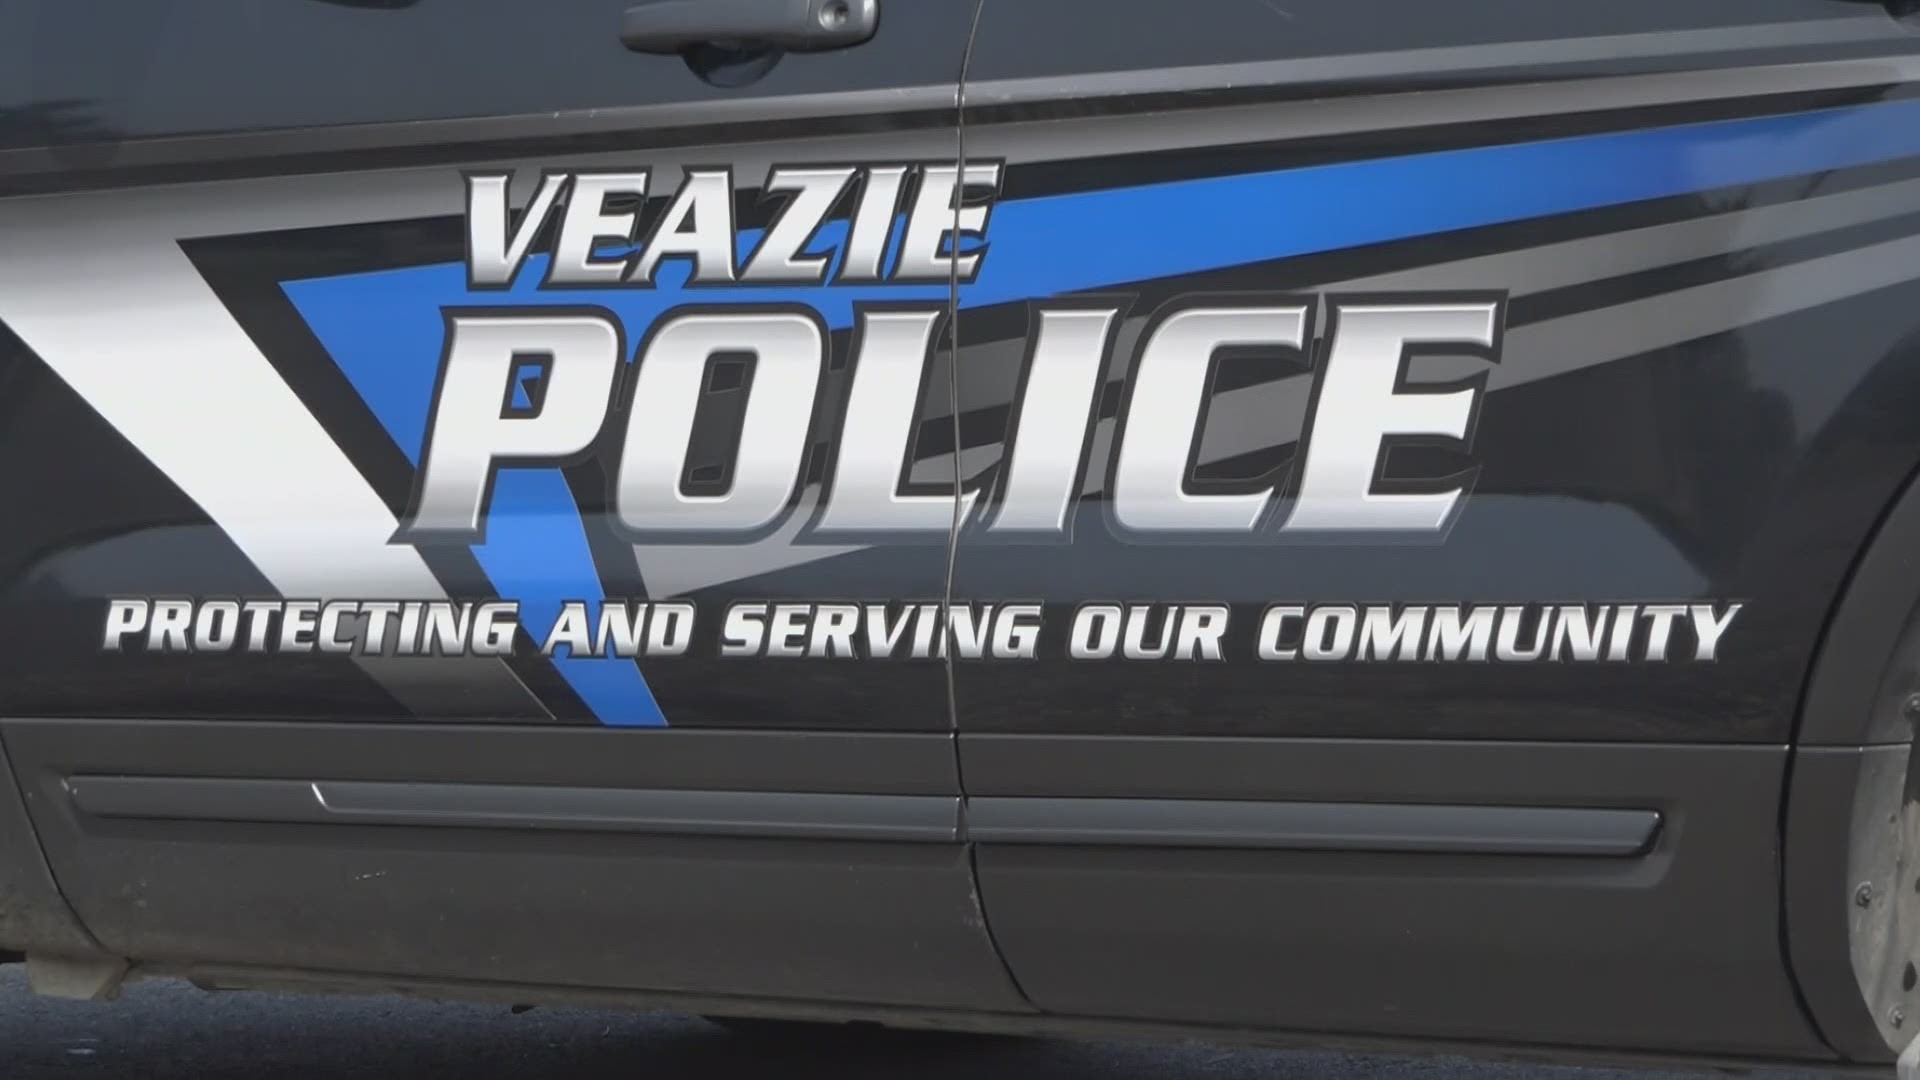 Veazie Police Department awarded one of the best agencies in New England for their efforts in community policing